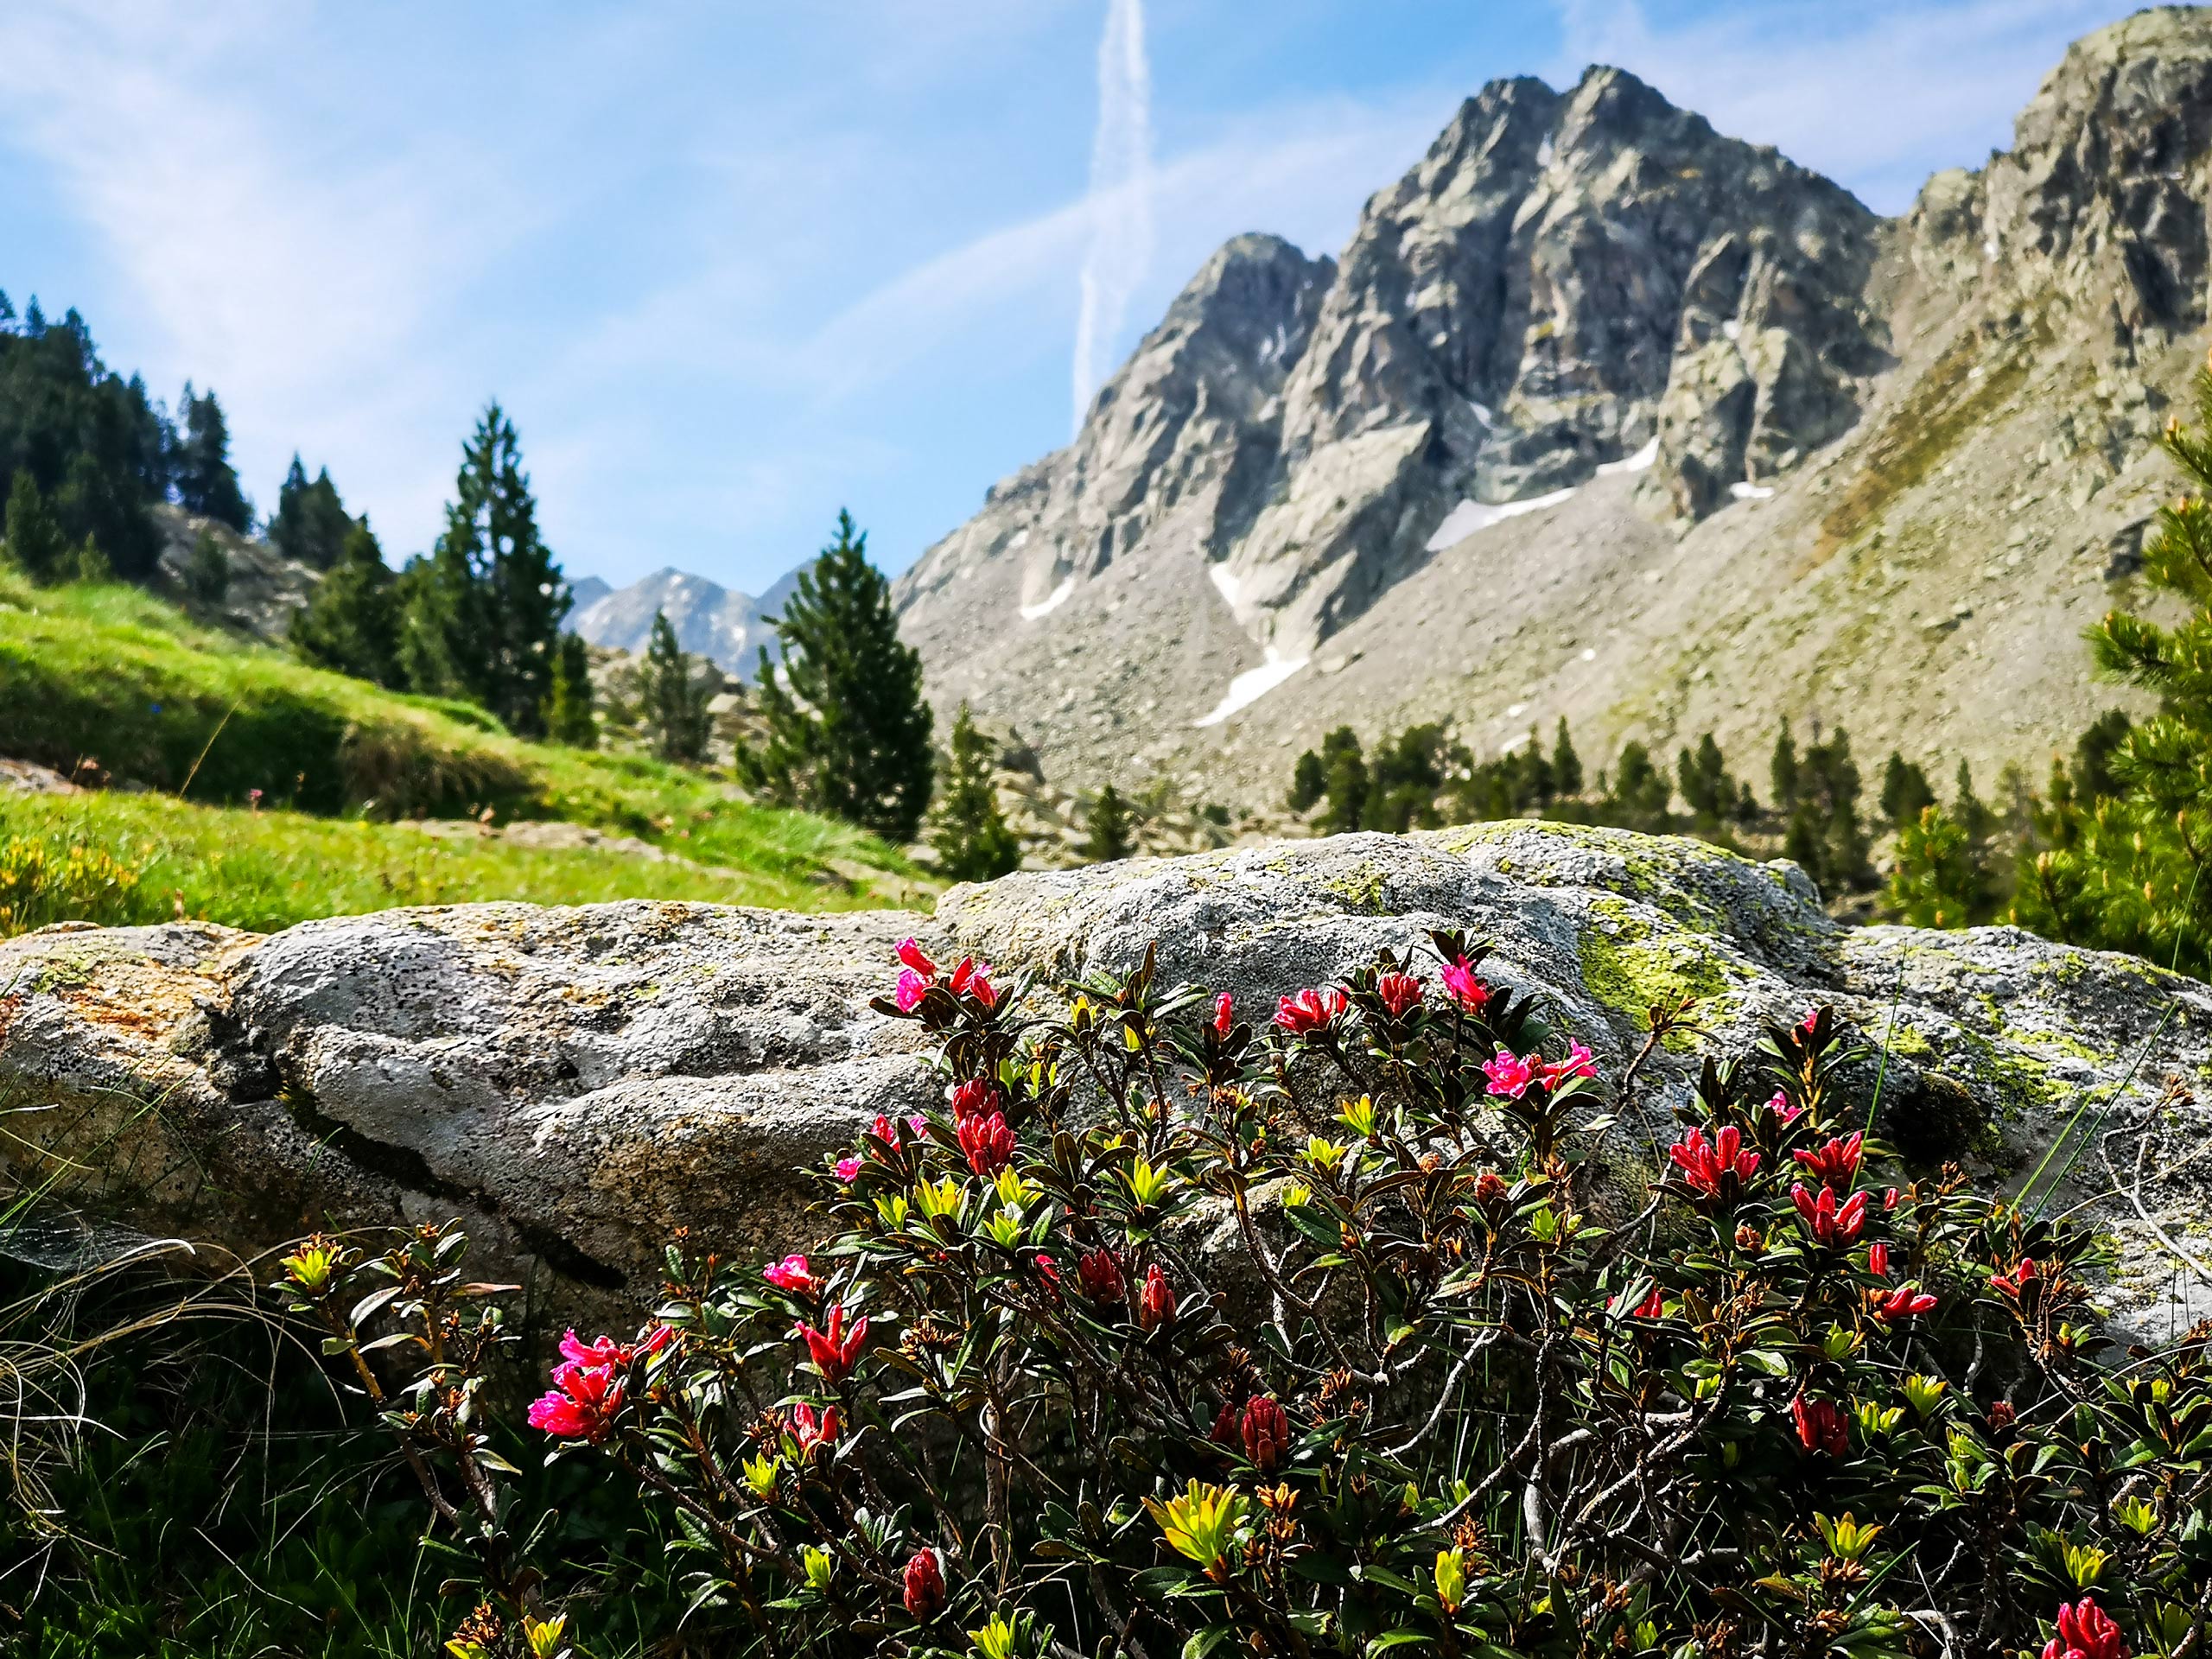 Rodondendrons on the mountain